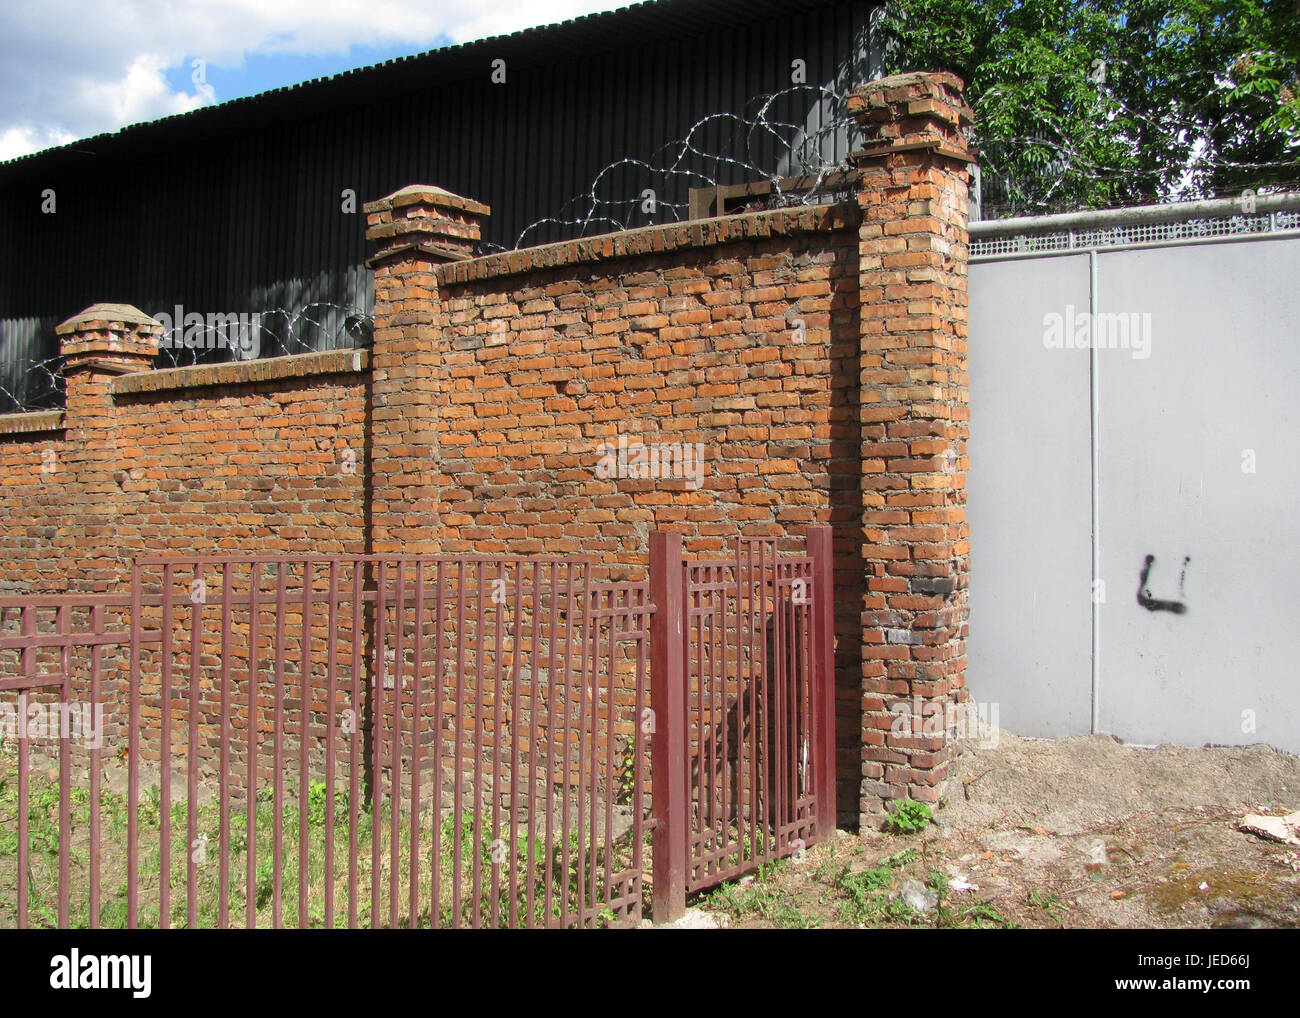 Metal fence, brick wall with barbed wire Stock Photo